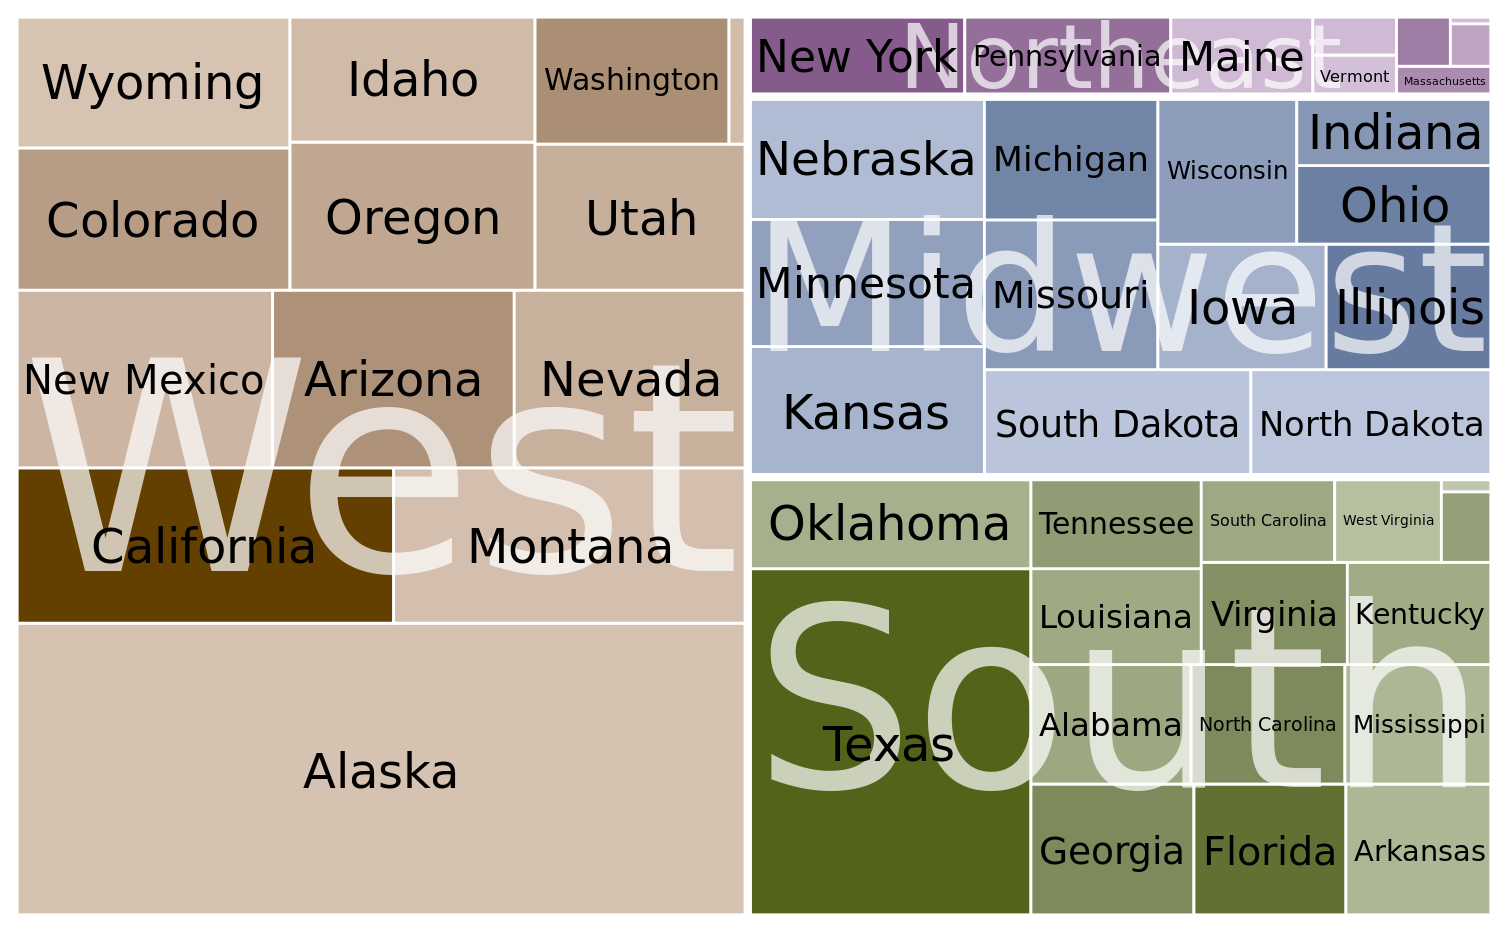 States in the U.S. visualized as a treemap. Each rectangle represents one state, and the area of each rectangle is proportional to the state’s land surface area. The states are grouped into four regions, West, Northeast, Midwest, and South. The coloring is proportional to the number of inhabitants for each state, with darker colors representing larger numbers of inhabitants. Data source: 2010 U.S. Census